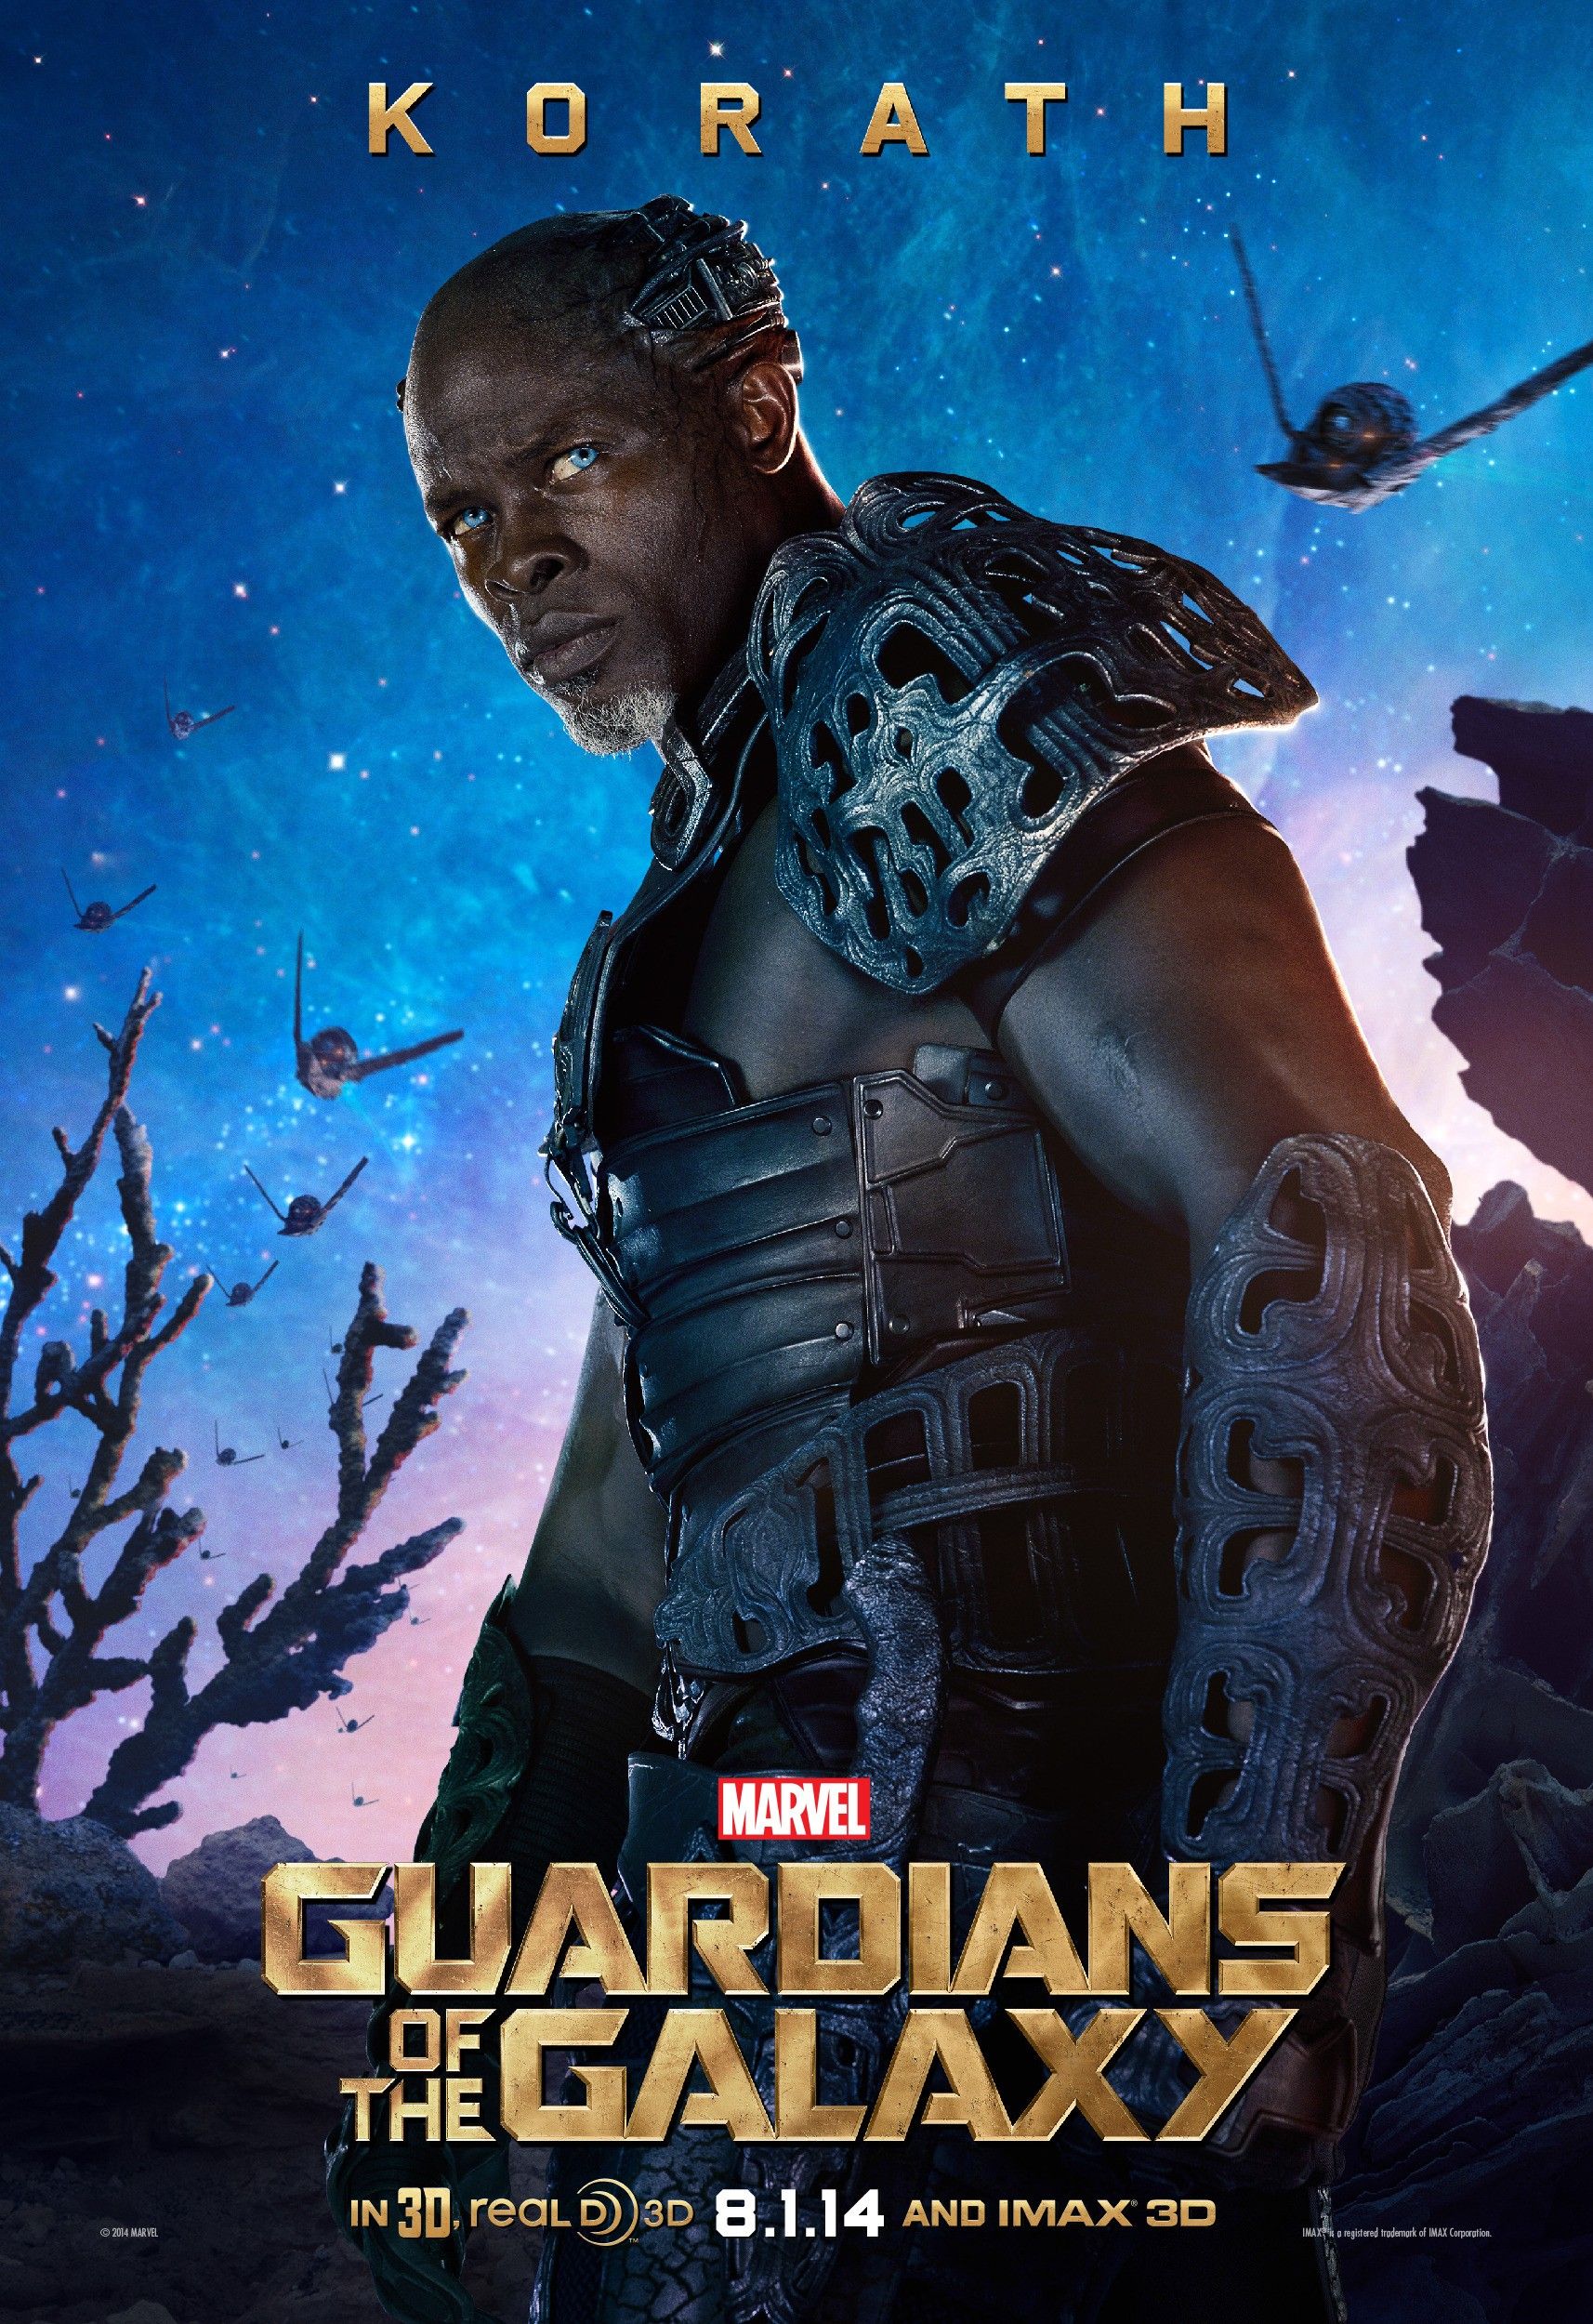 Guardians of the Galaxy Korath Poster